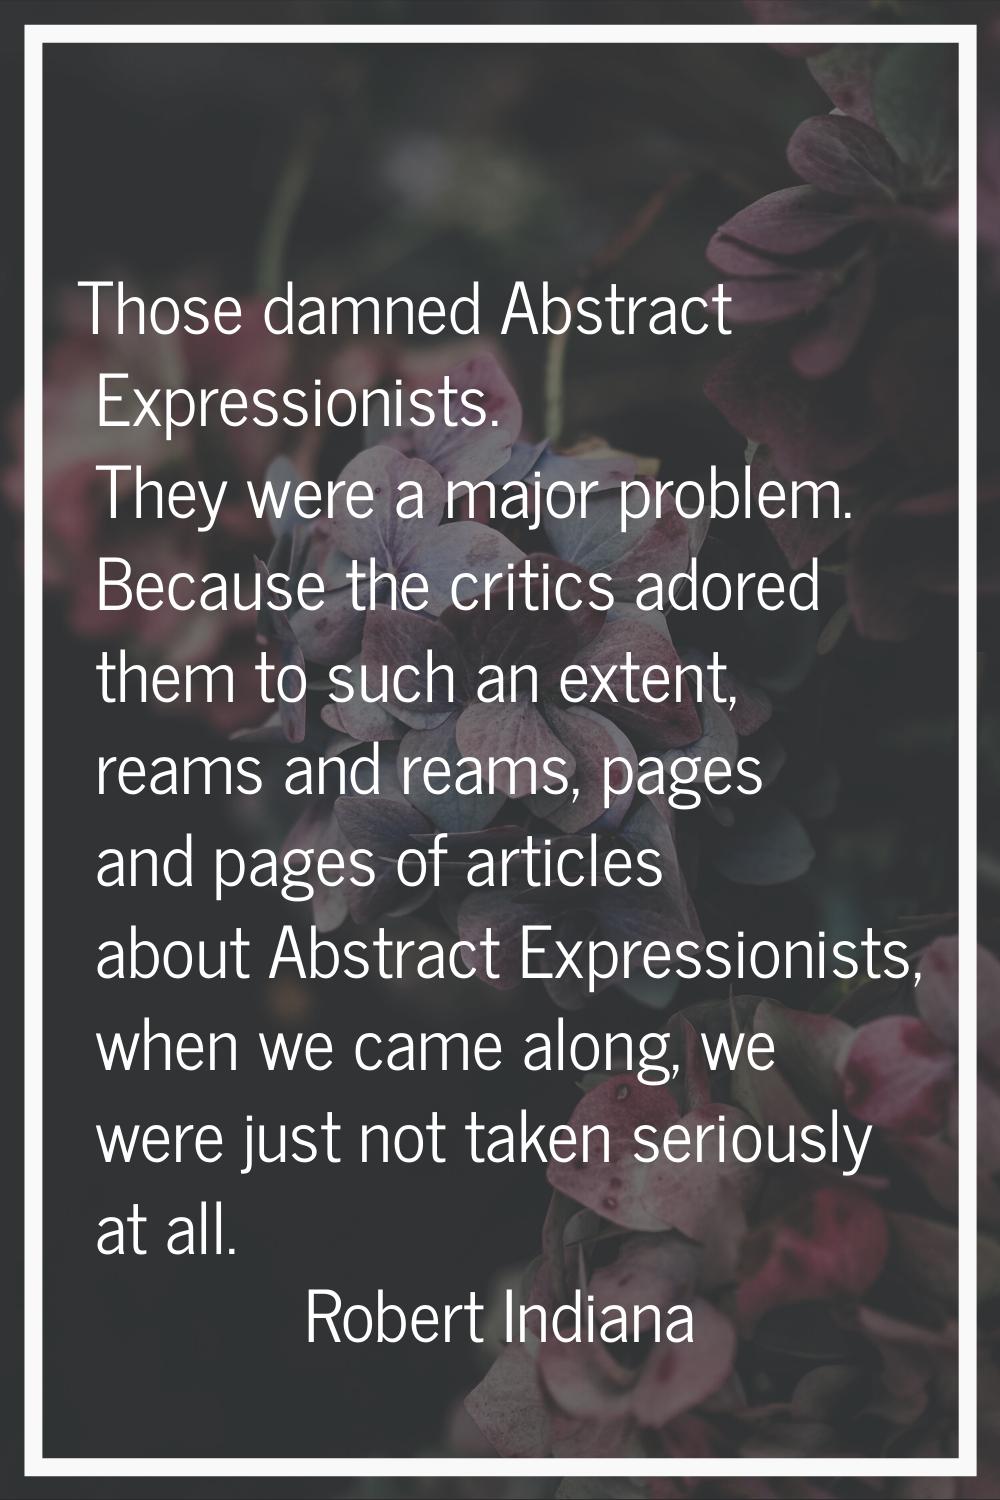 Those damned Abstract Expressionists. They were a major problem. Because the critics adored them to